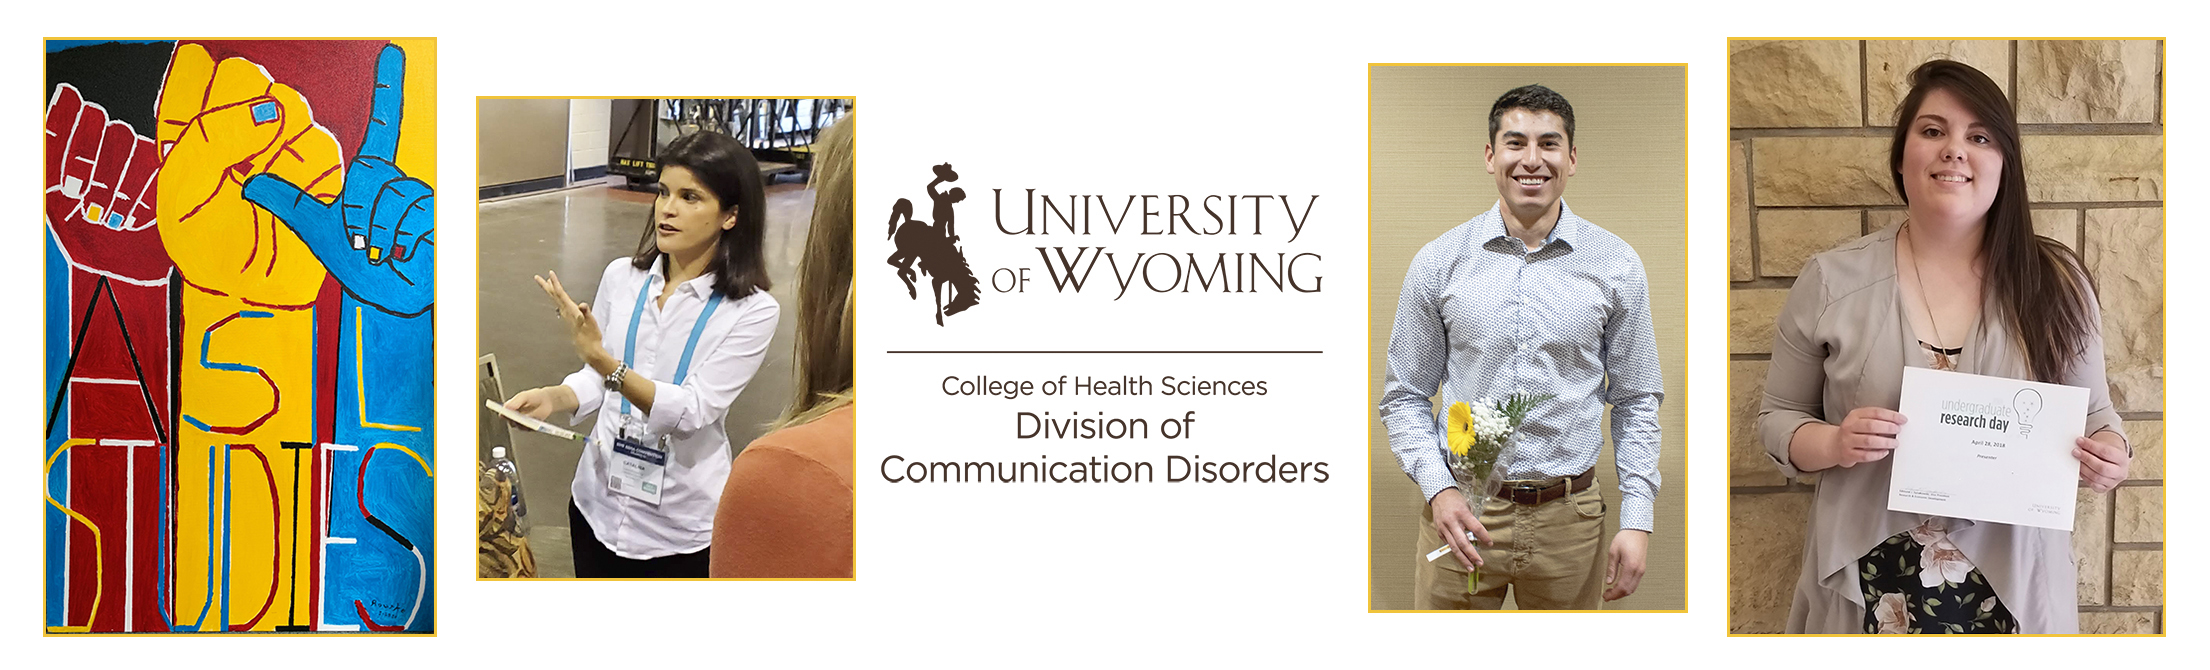 Showing student diversity within the UW Division of Communication Disorders.